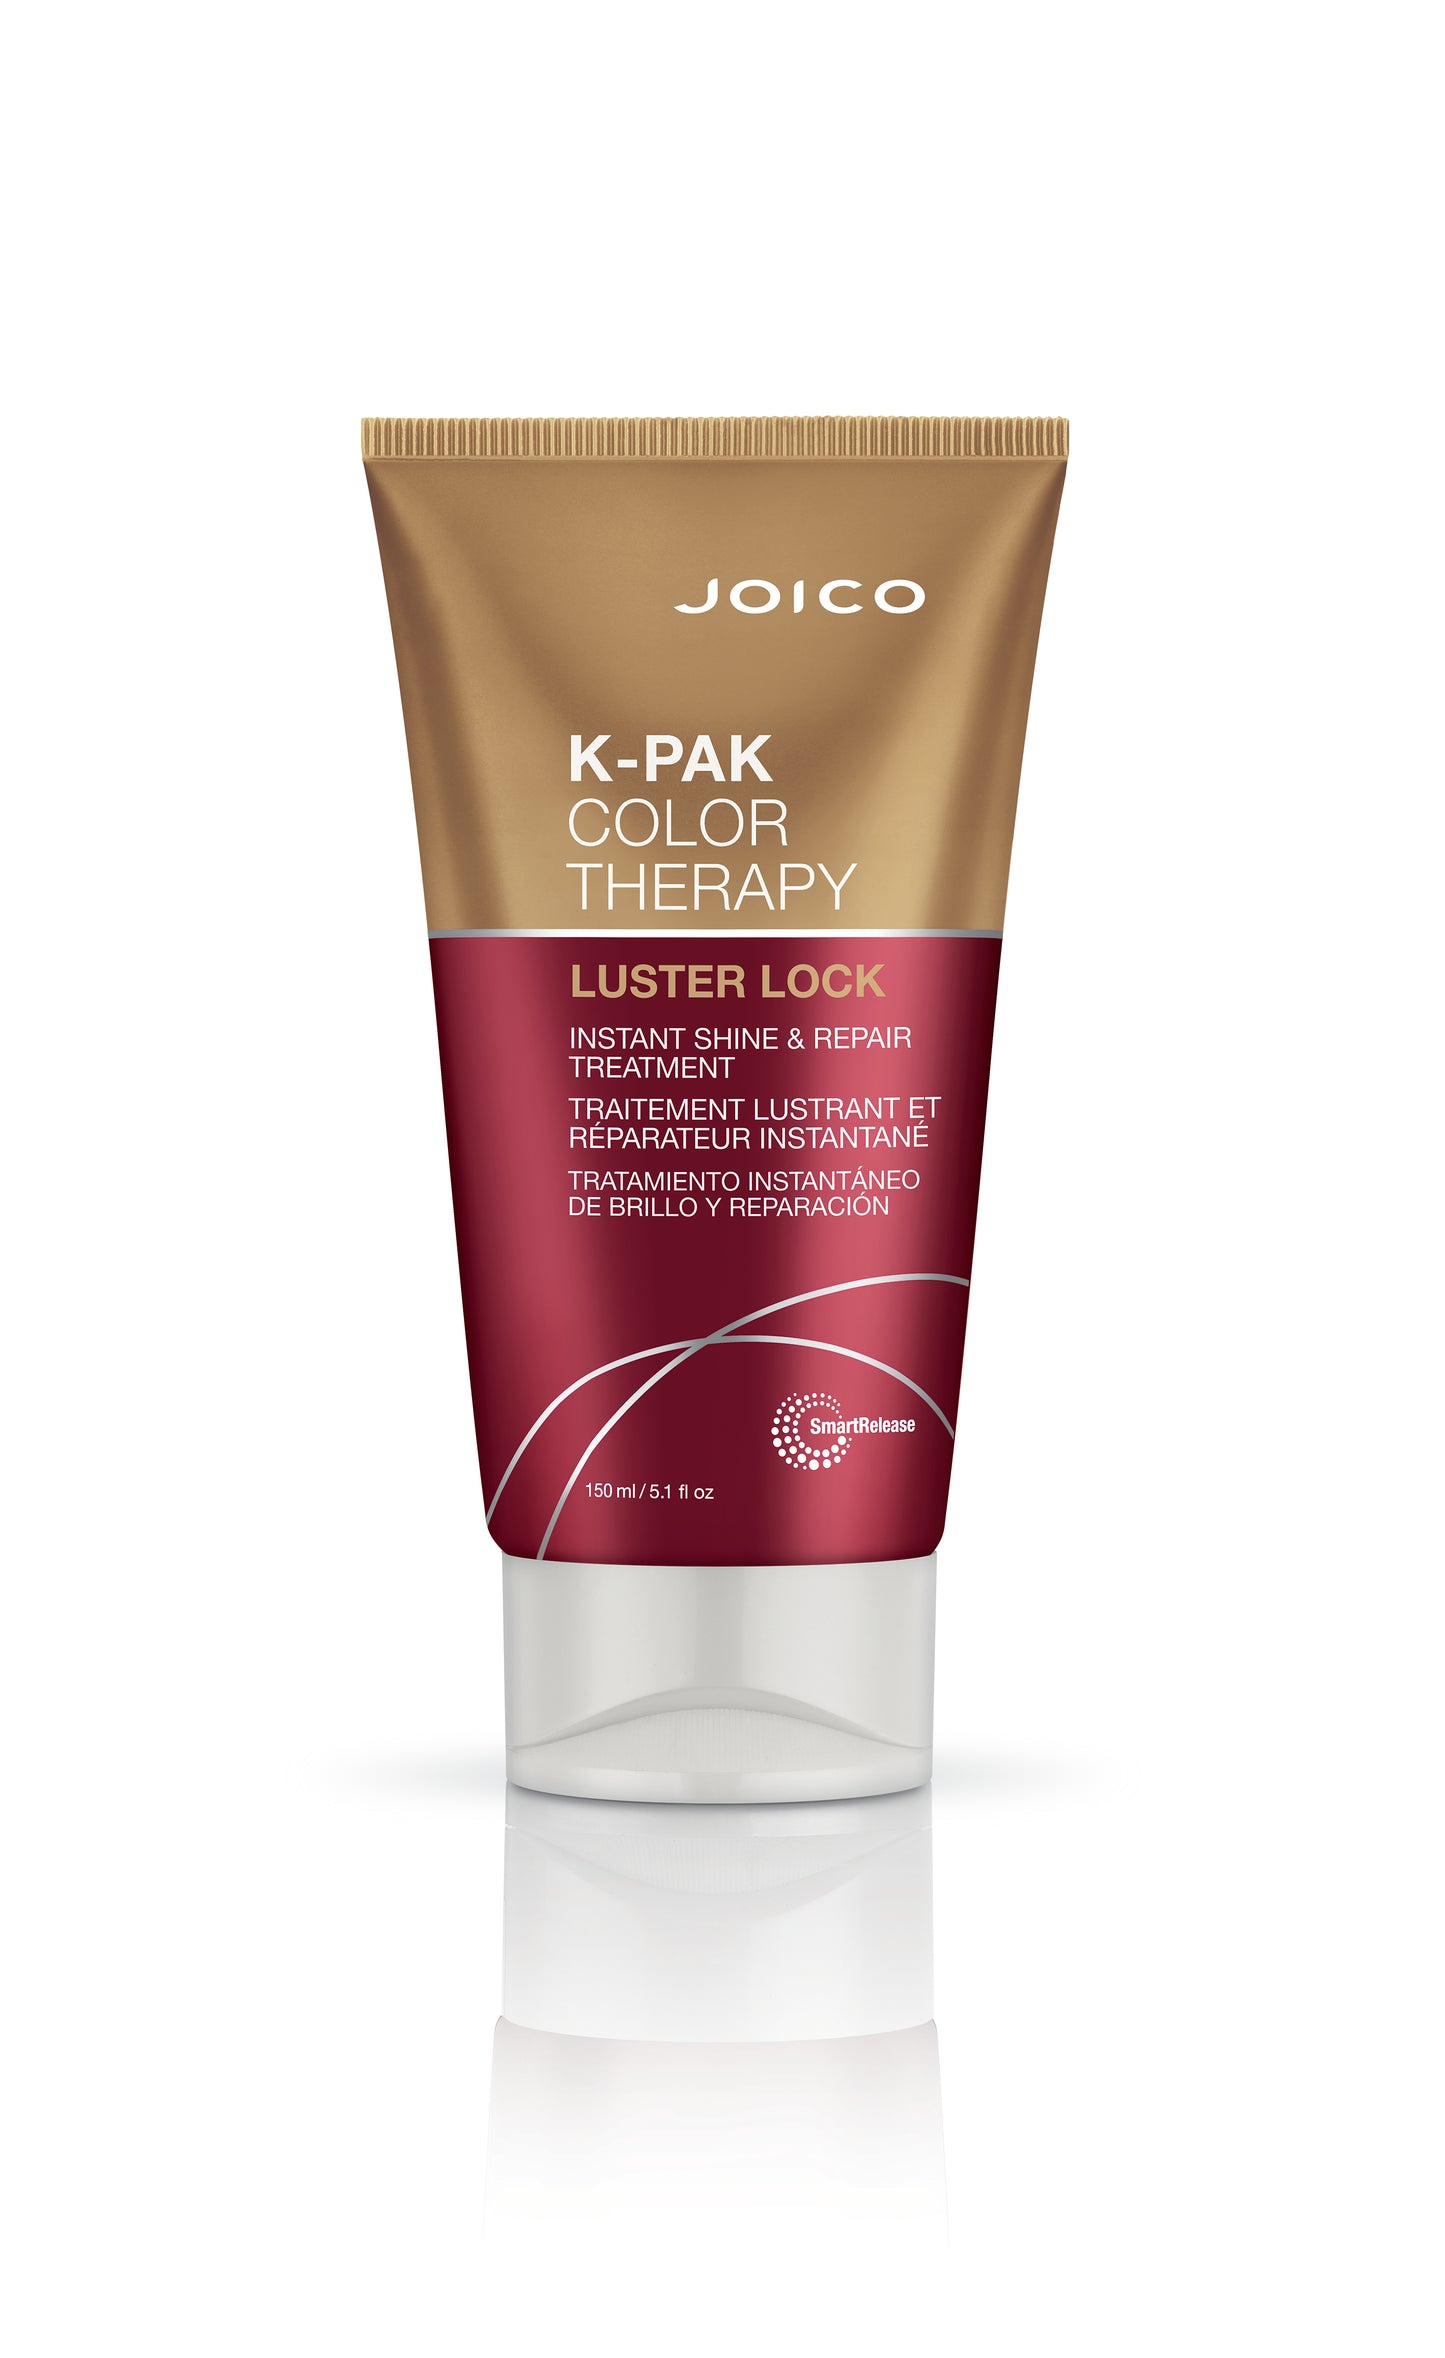 Joico K-PAK Color Therapy Luster Lock 150ml Treatment